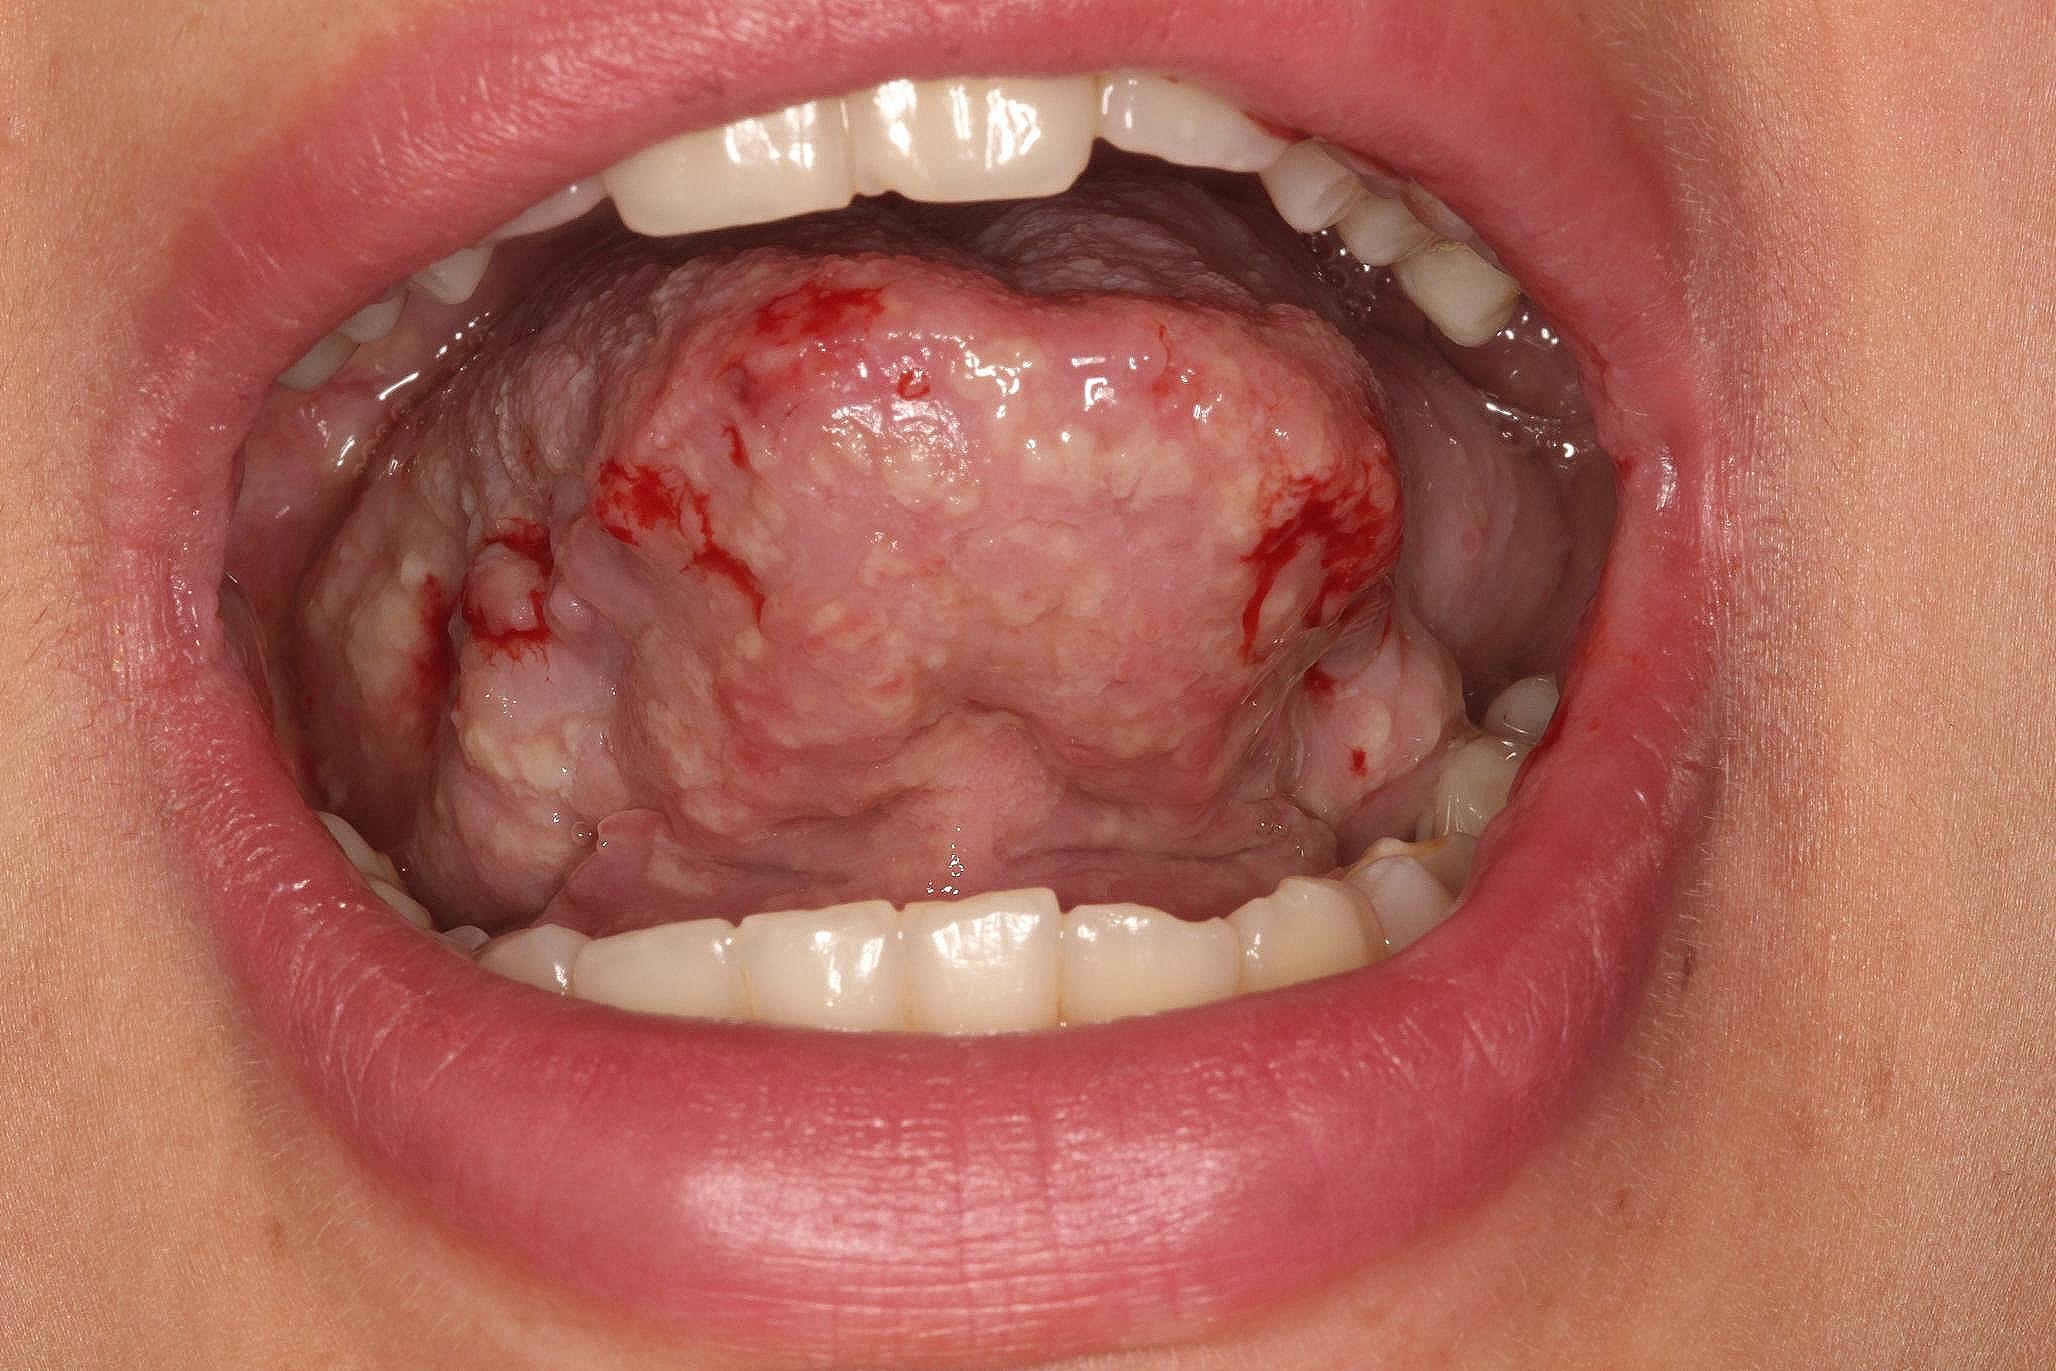 Pyodermatitis-pyostomatitis vegetans: a case report and systematic review focusing on oral involvement